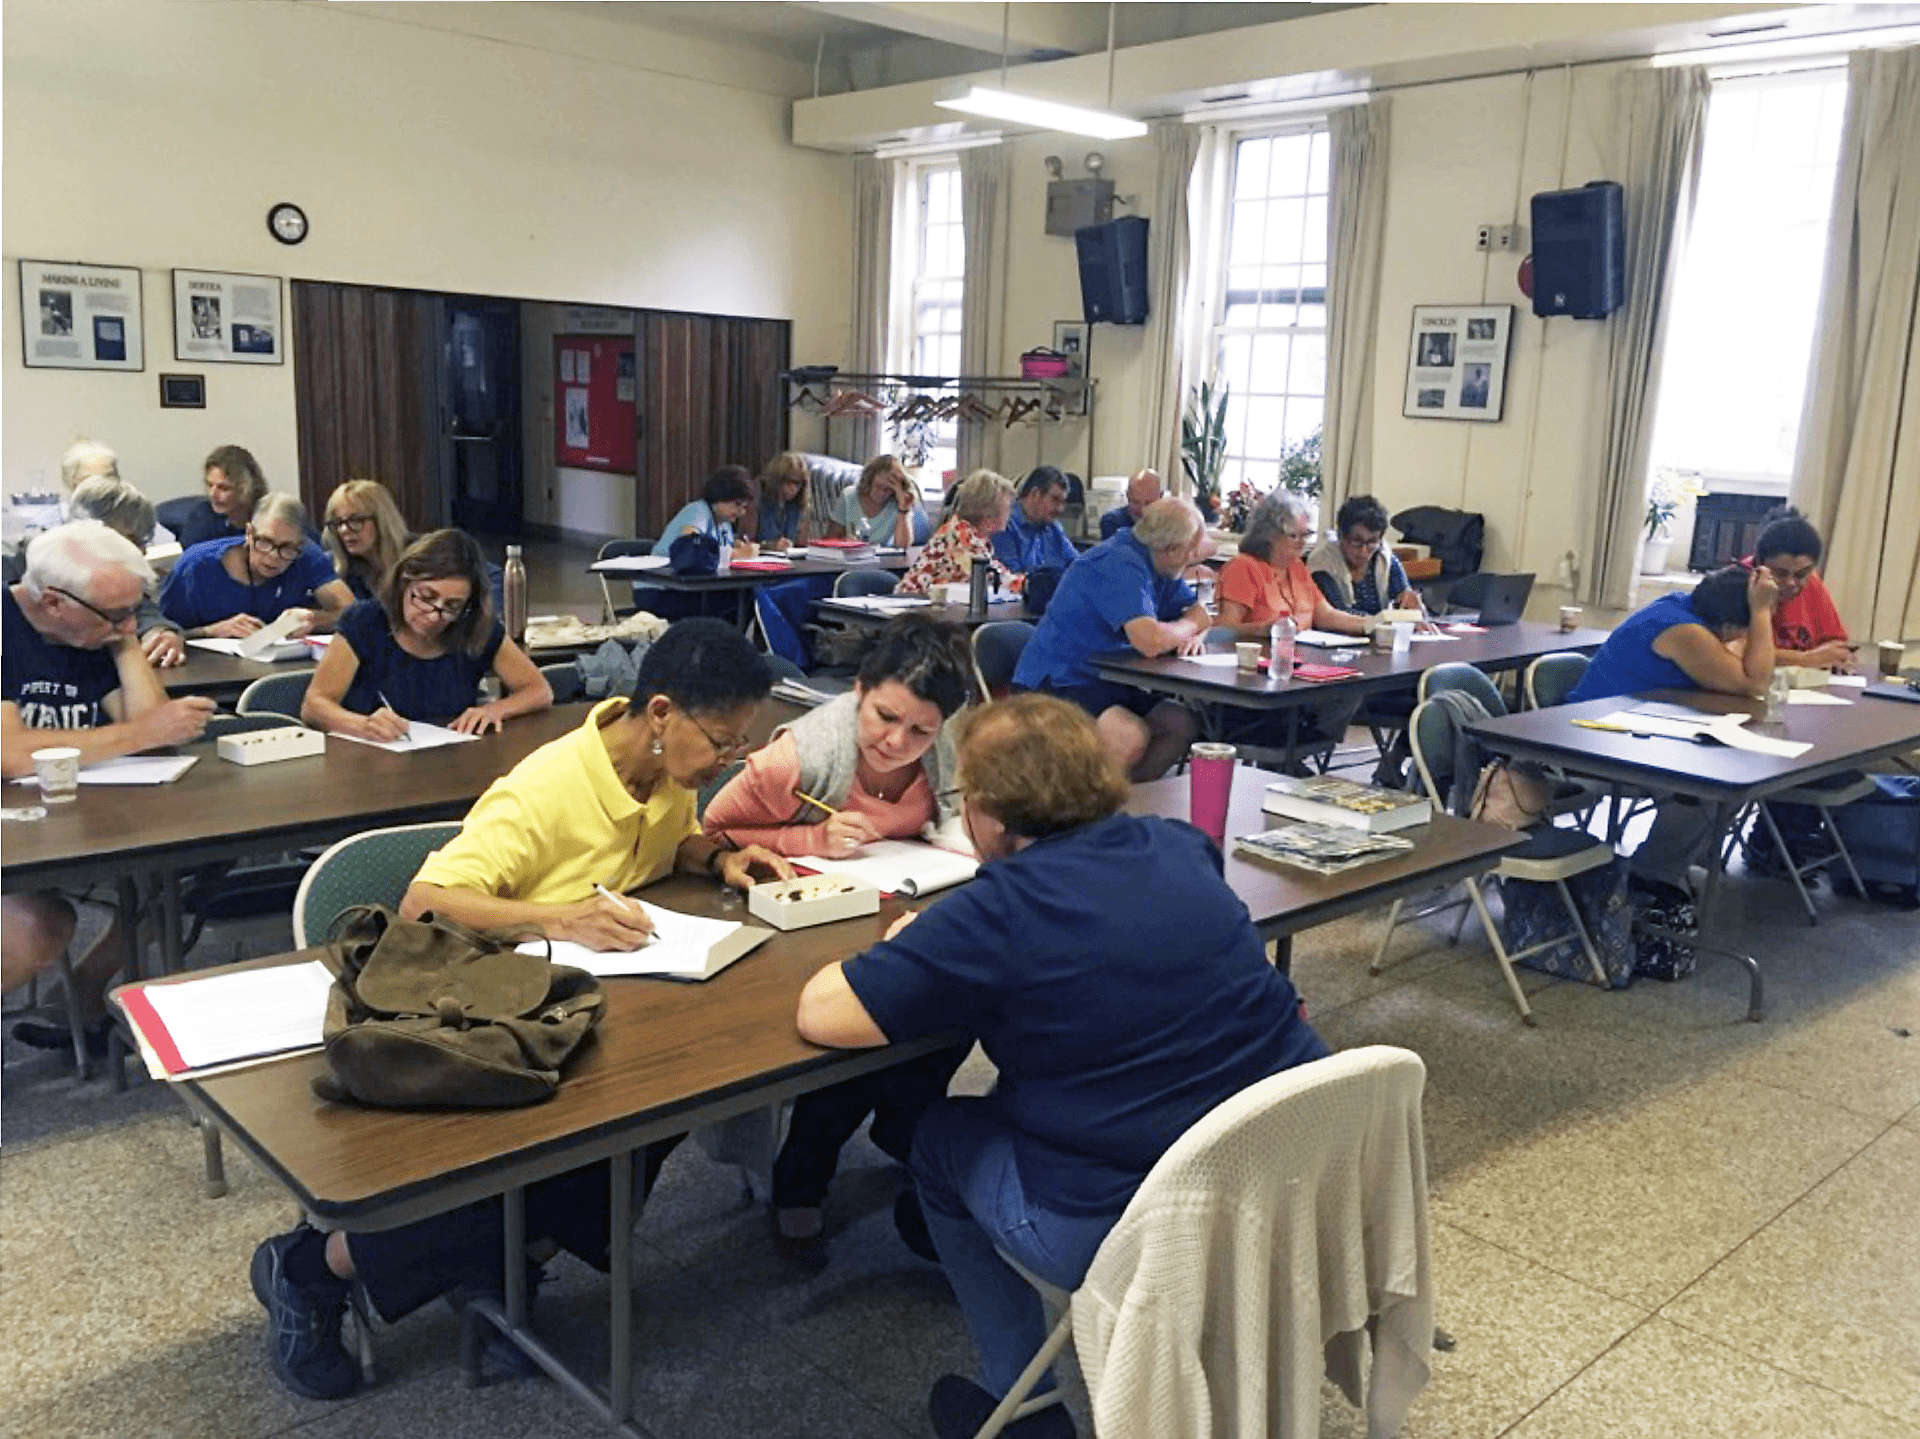 photo shows a classroom setting where master gardeners are learning to ideinty pests